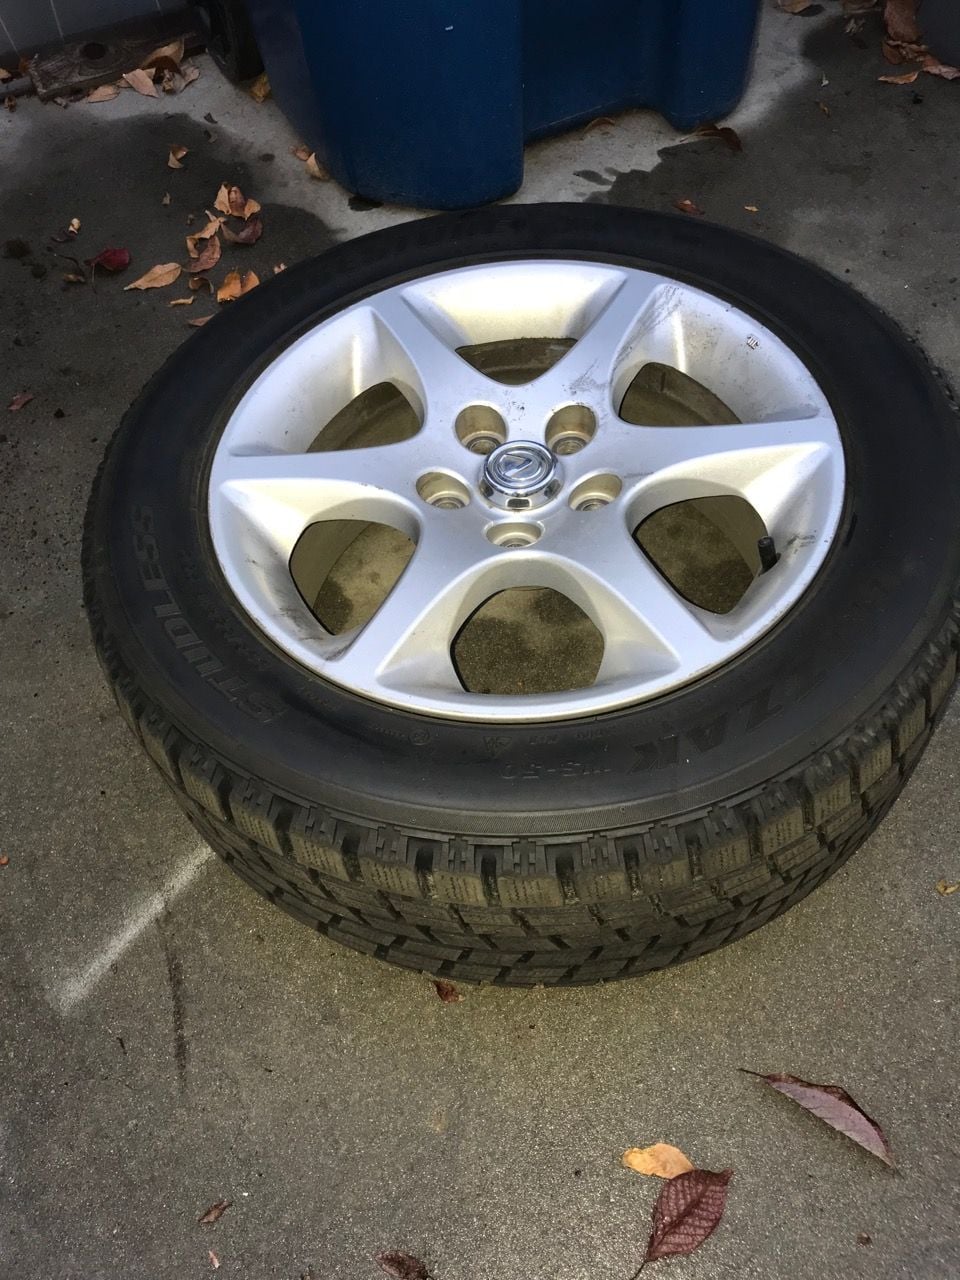 Wheels and Tires/Axles - 2001 GS430 Wheels/Blizzak snow tires. - Used - 1999 to 2004 Lexus GS430 - Boise, ID 83706, United States